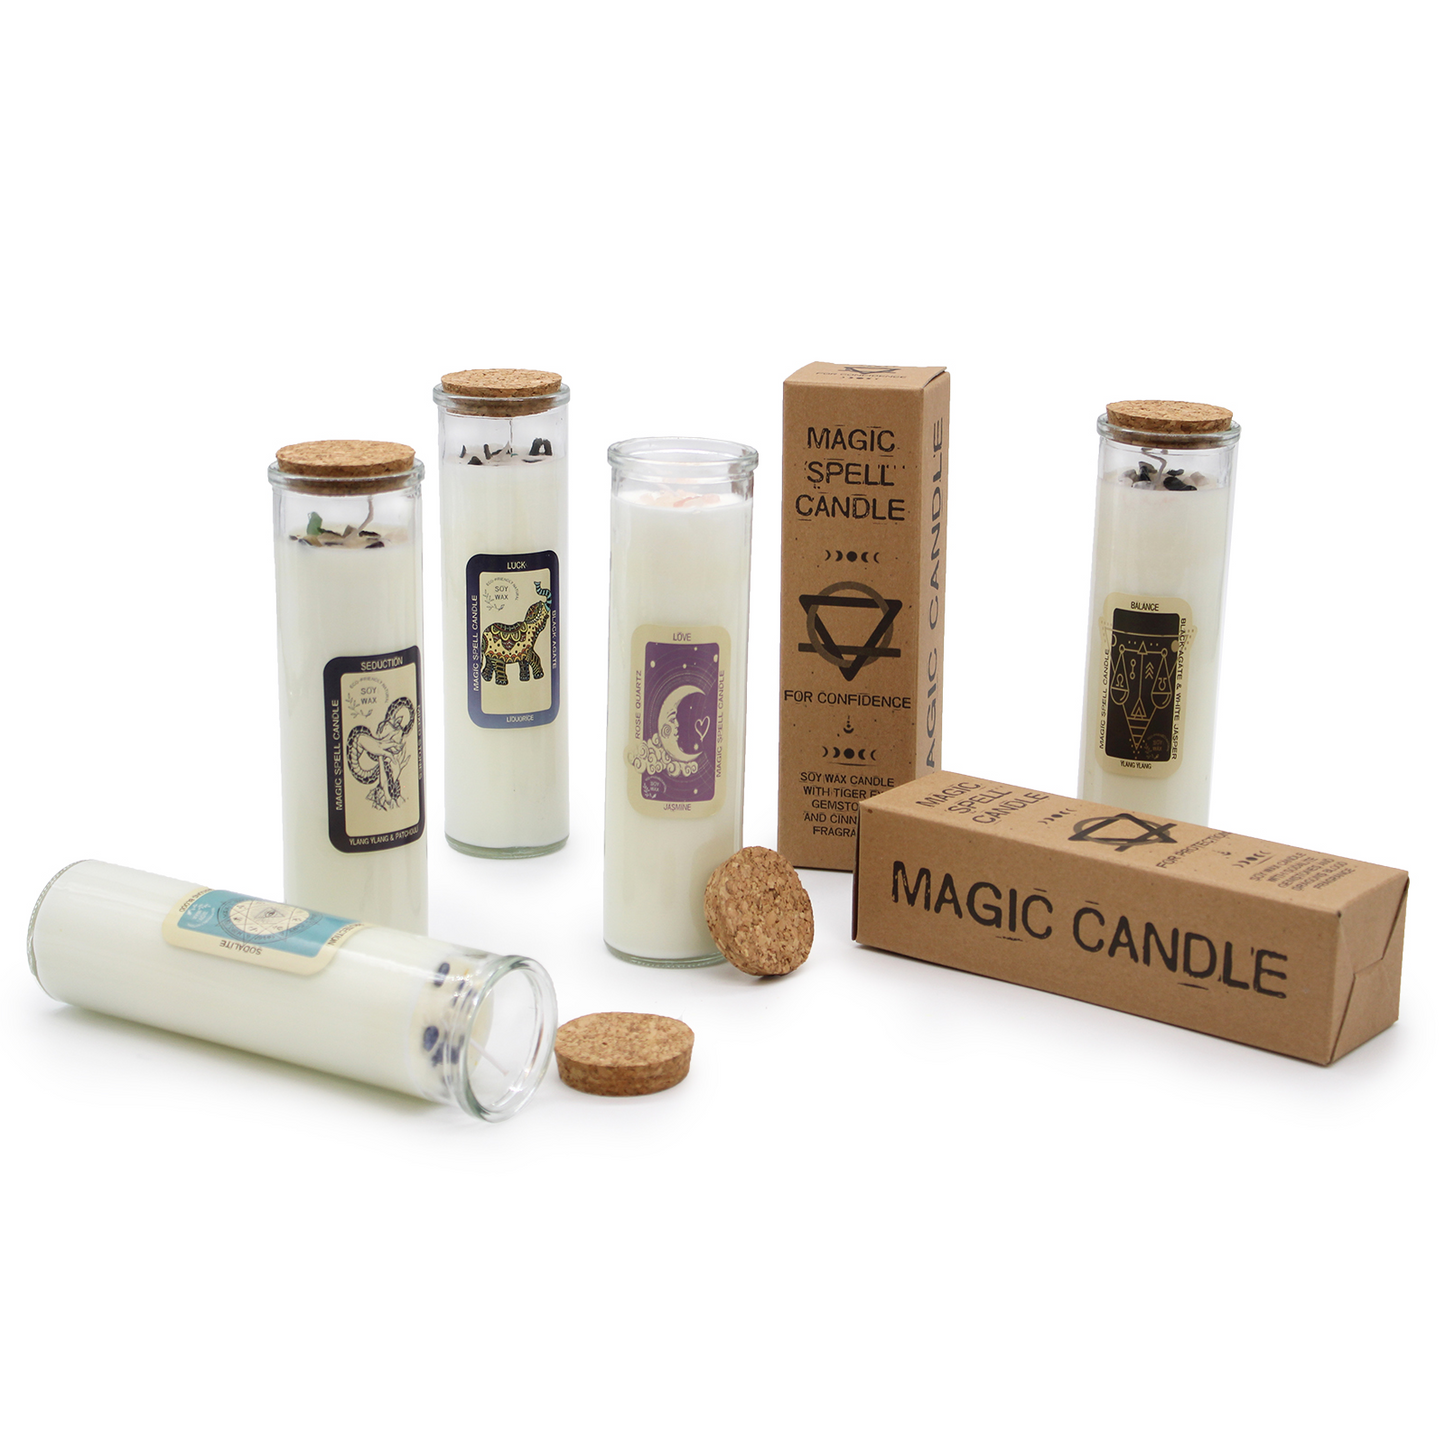 Magic Spell Candle - Friendship